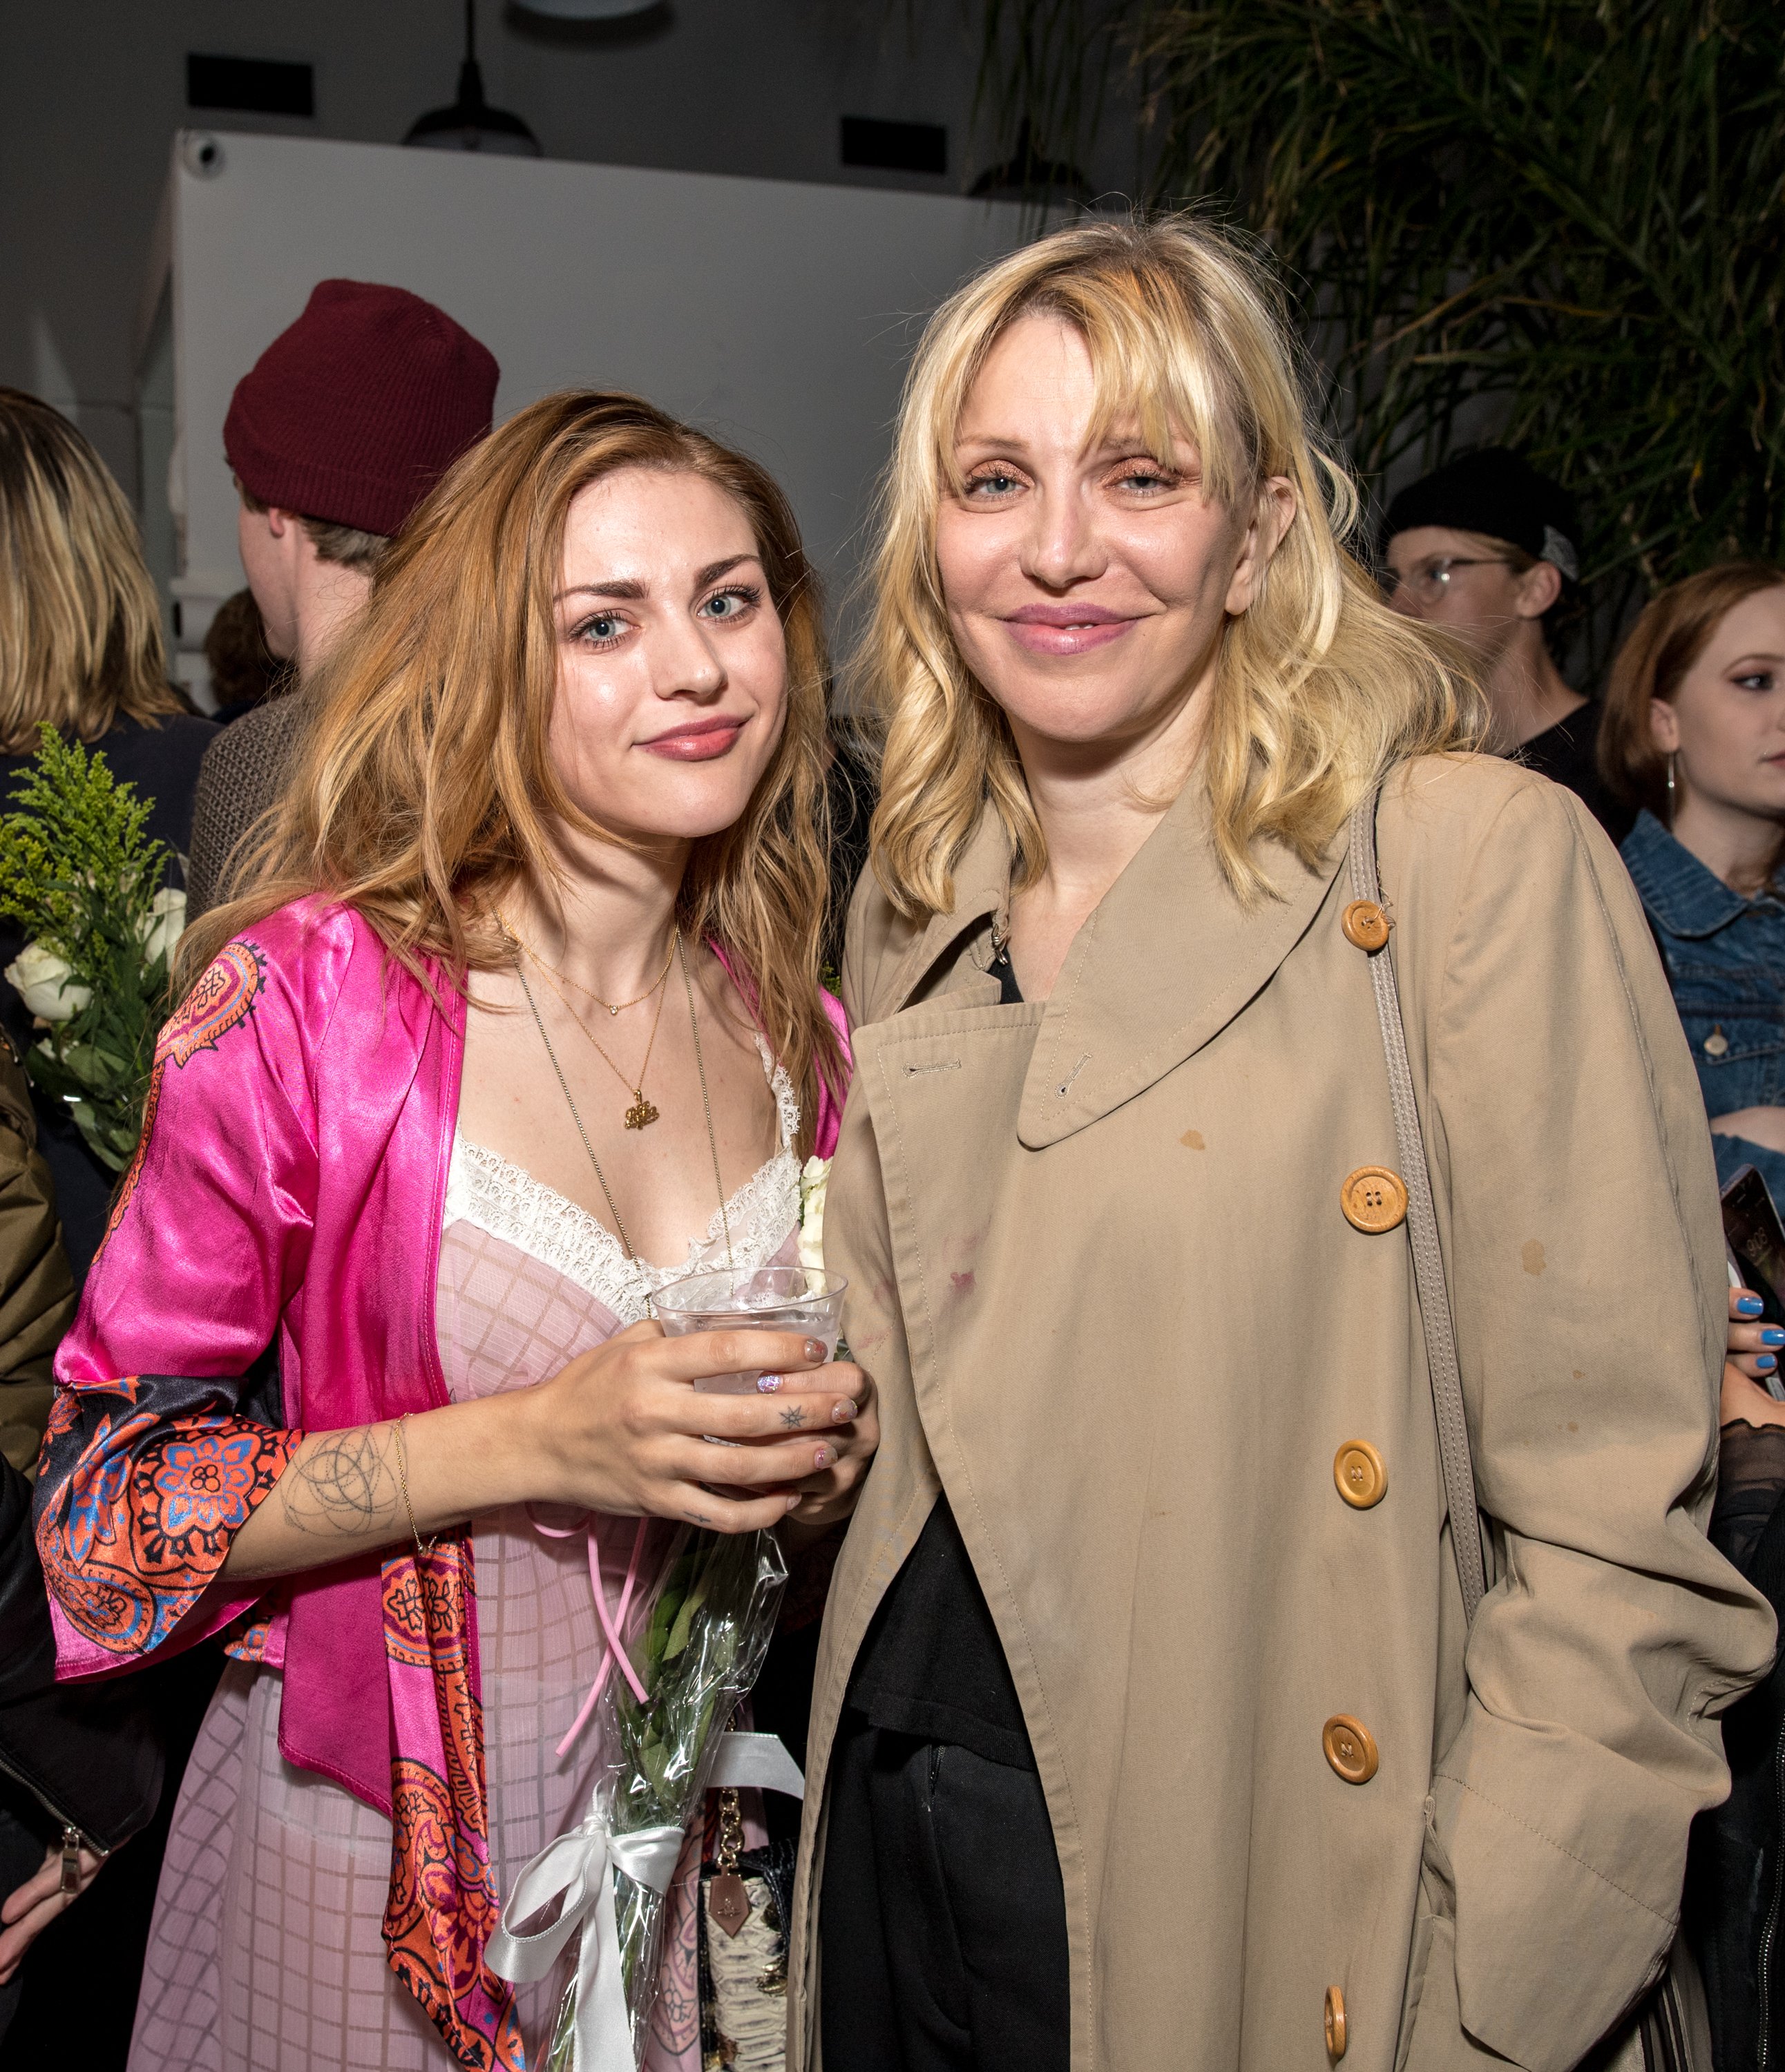 Frances Bean Cobain and Courtney Love at the launch and store opening of "Other Peoples Children" on March 8, 2018 | Source: Getty Images